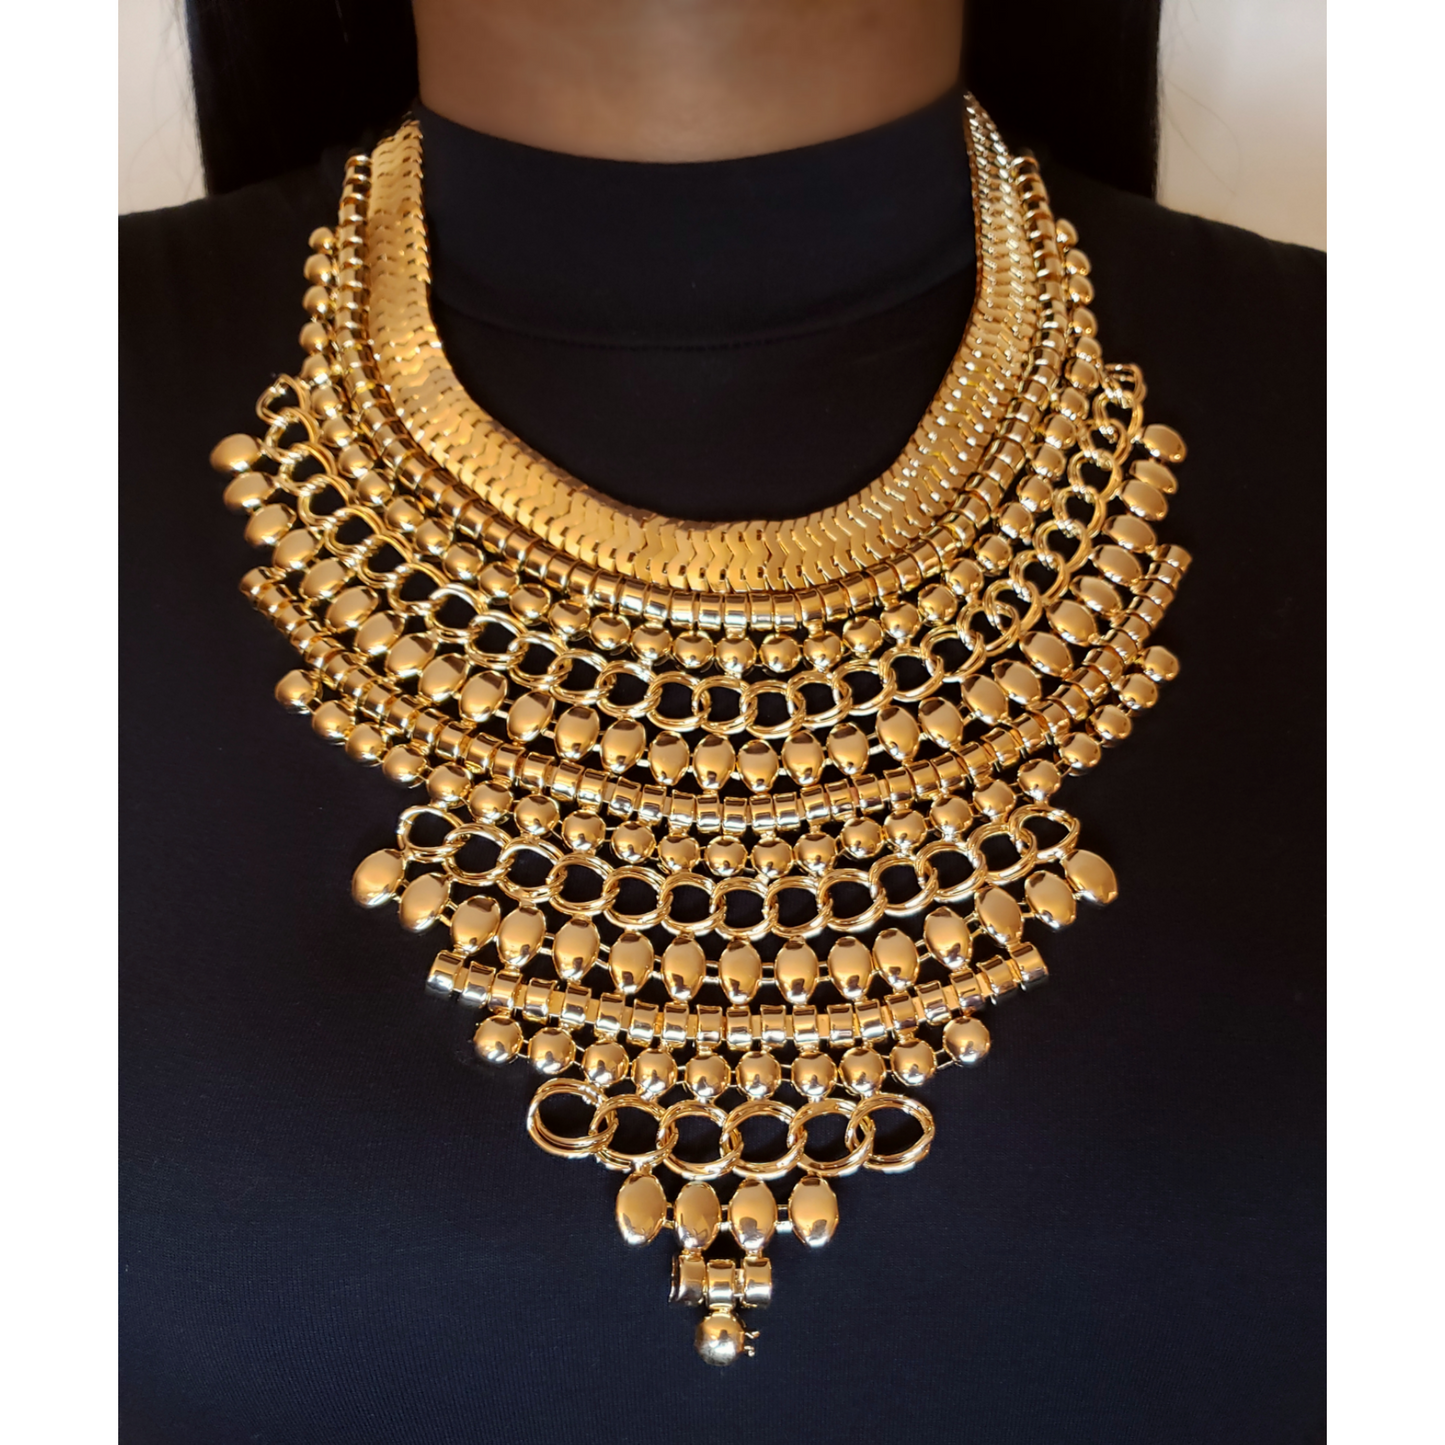 Moroccan Statement Necklace